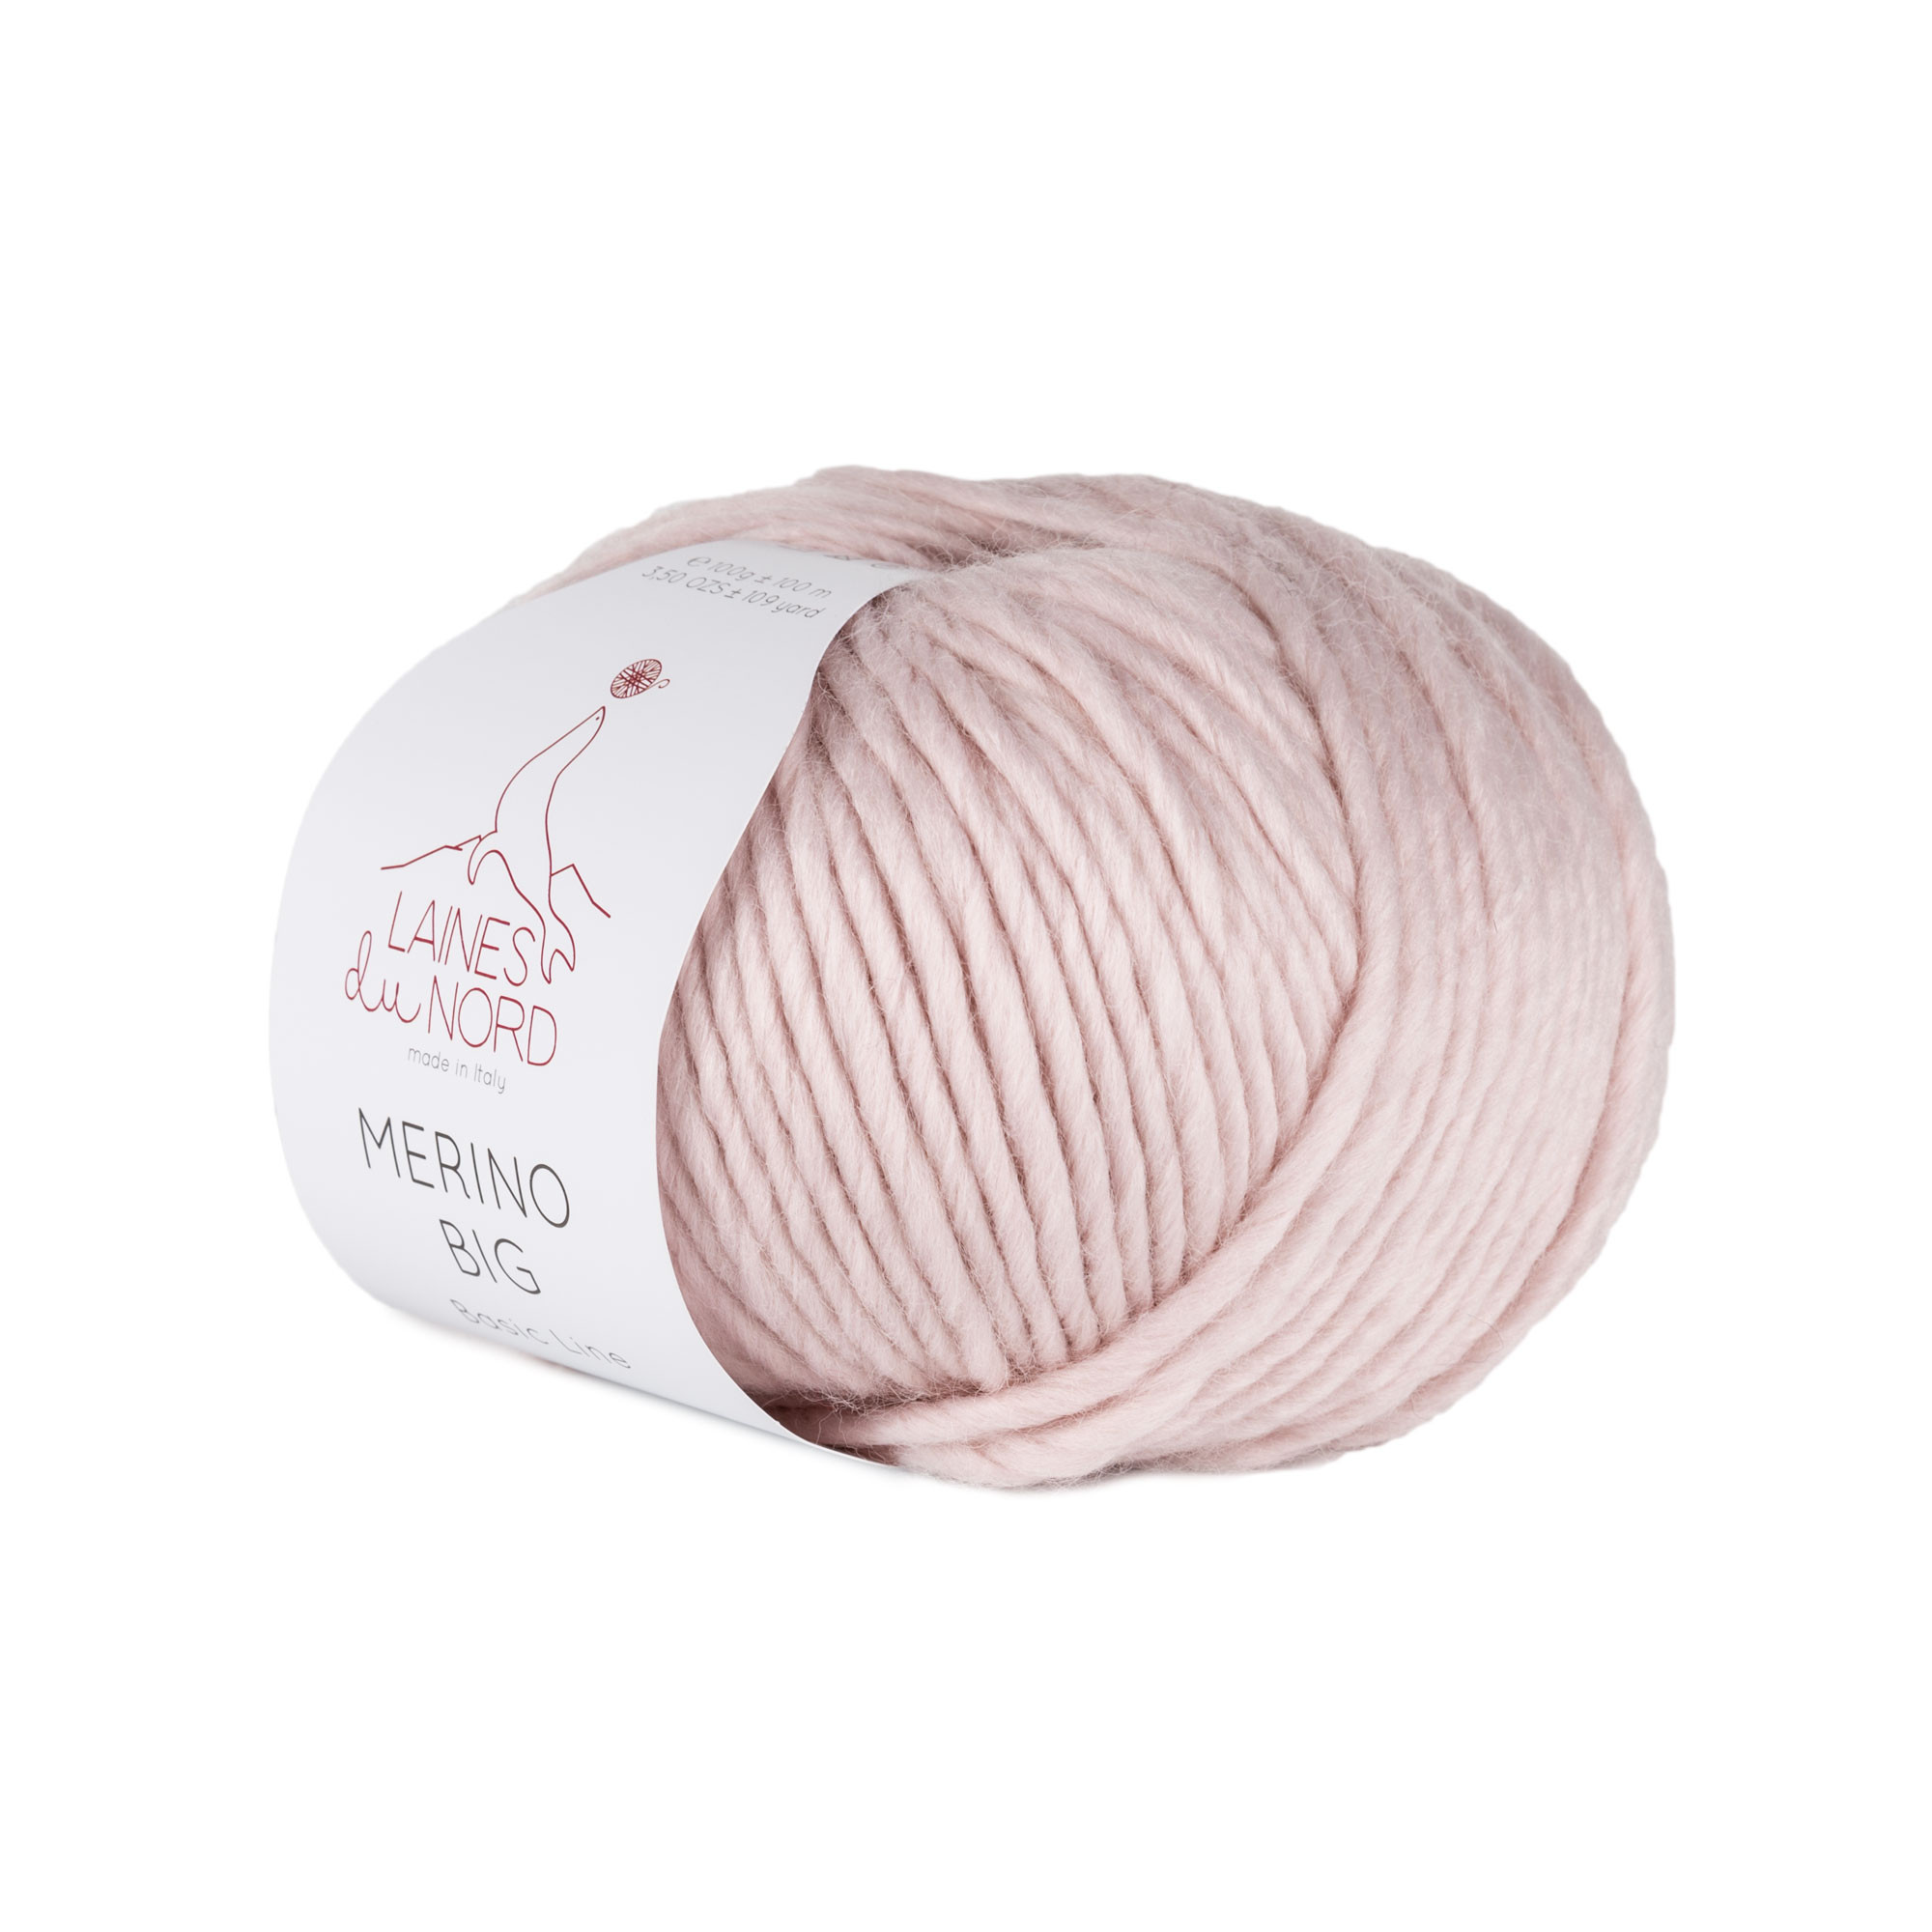 Merino Big by Laines du Nord